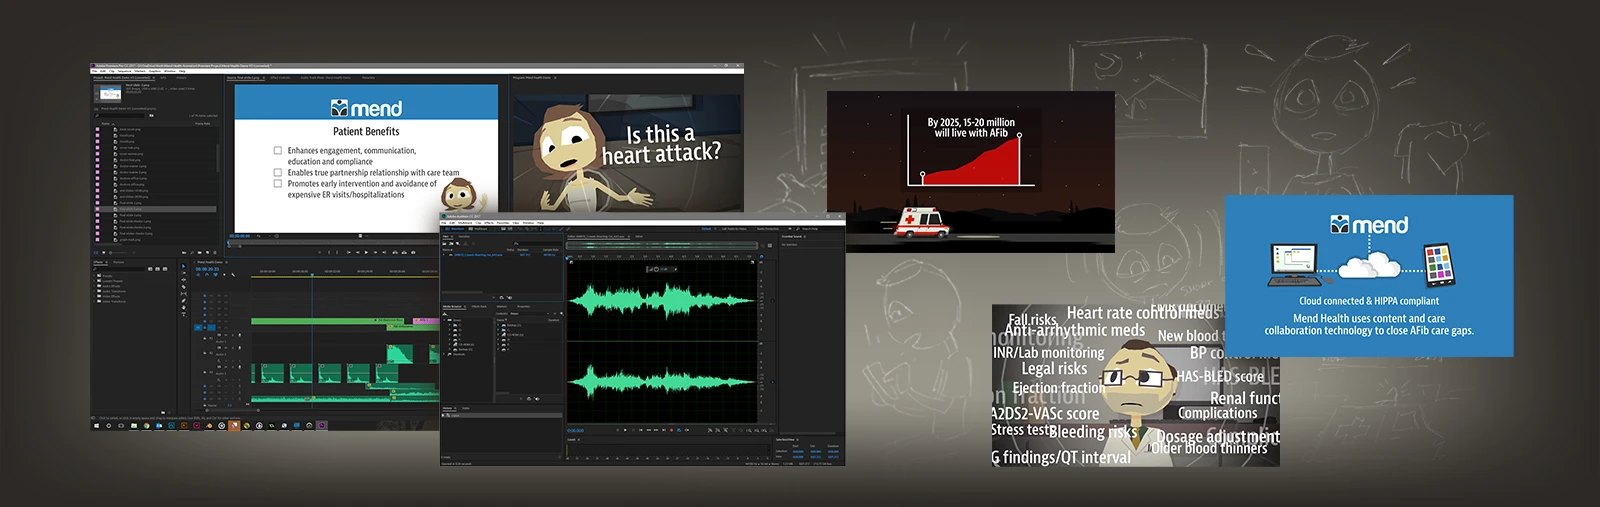 video editor with storyboards and stills from the final cut